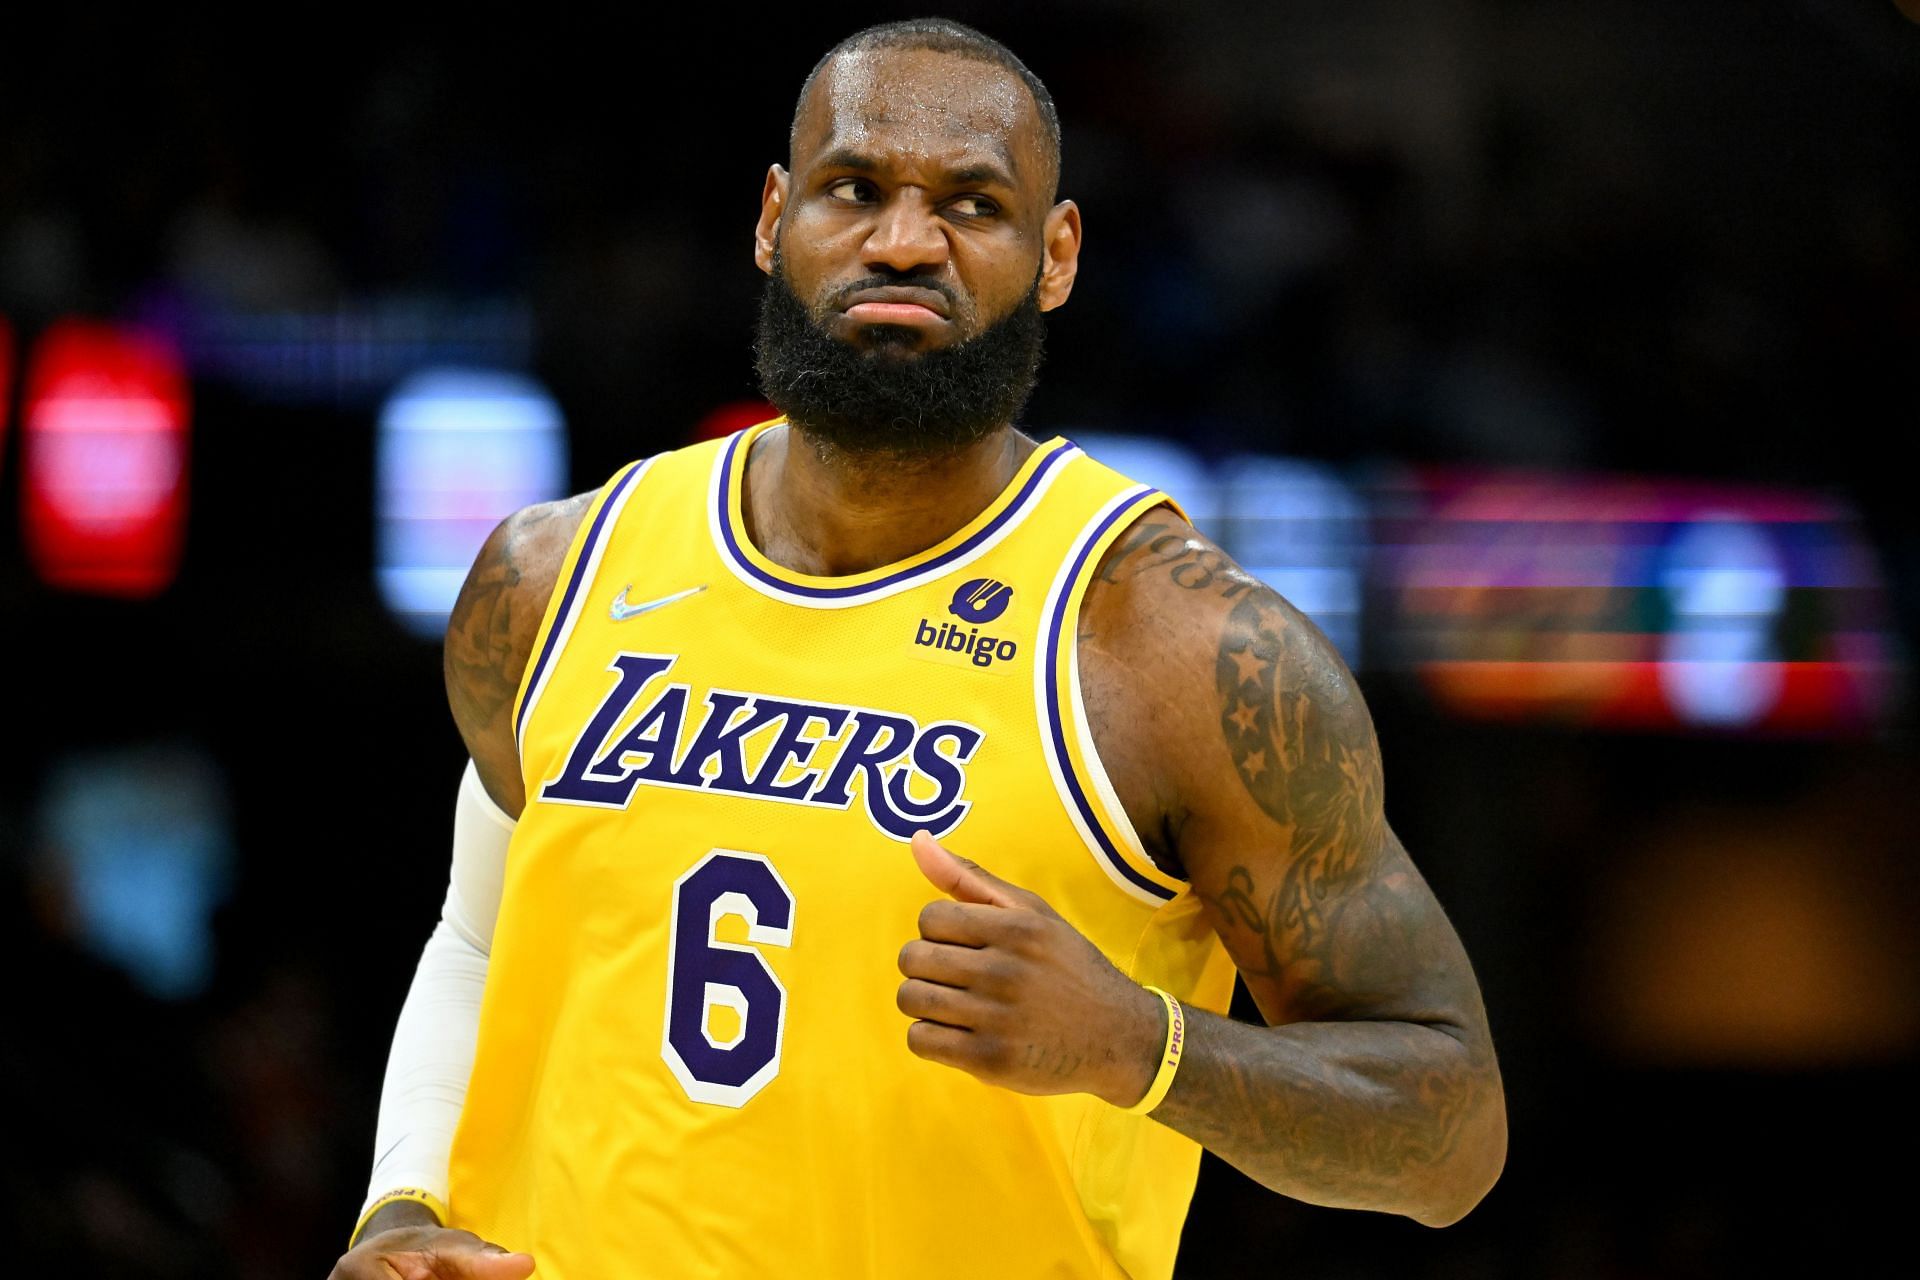 LeBron James during a Los Angeles Lakers v Cleveland Cavaliers regular season game